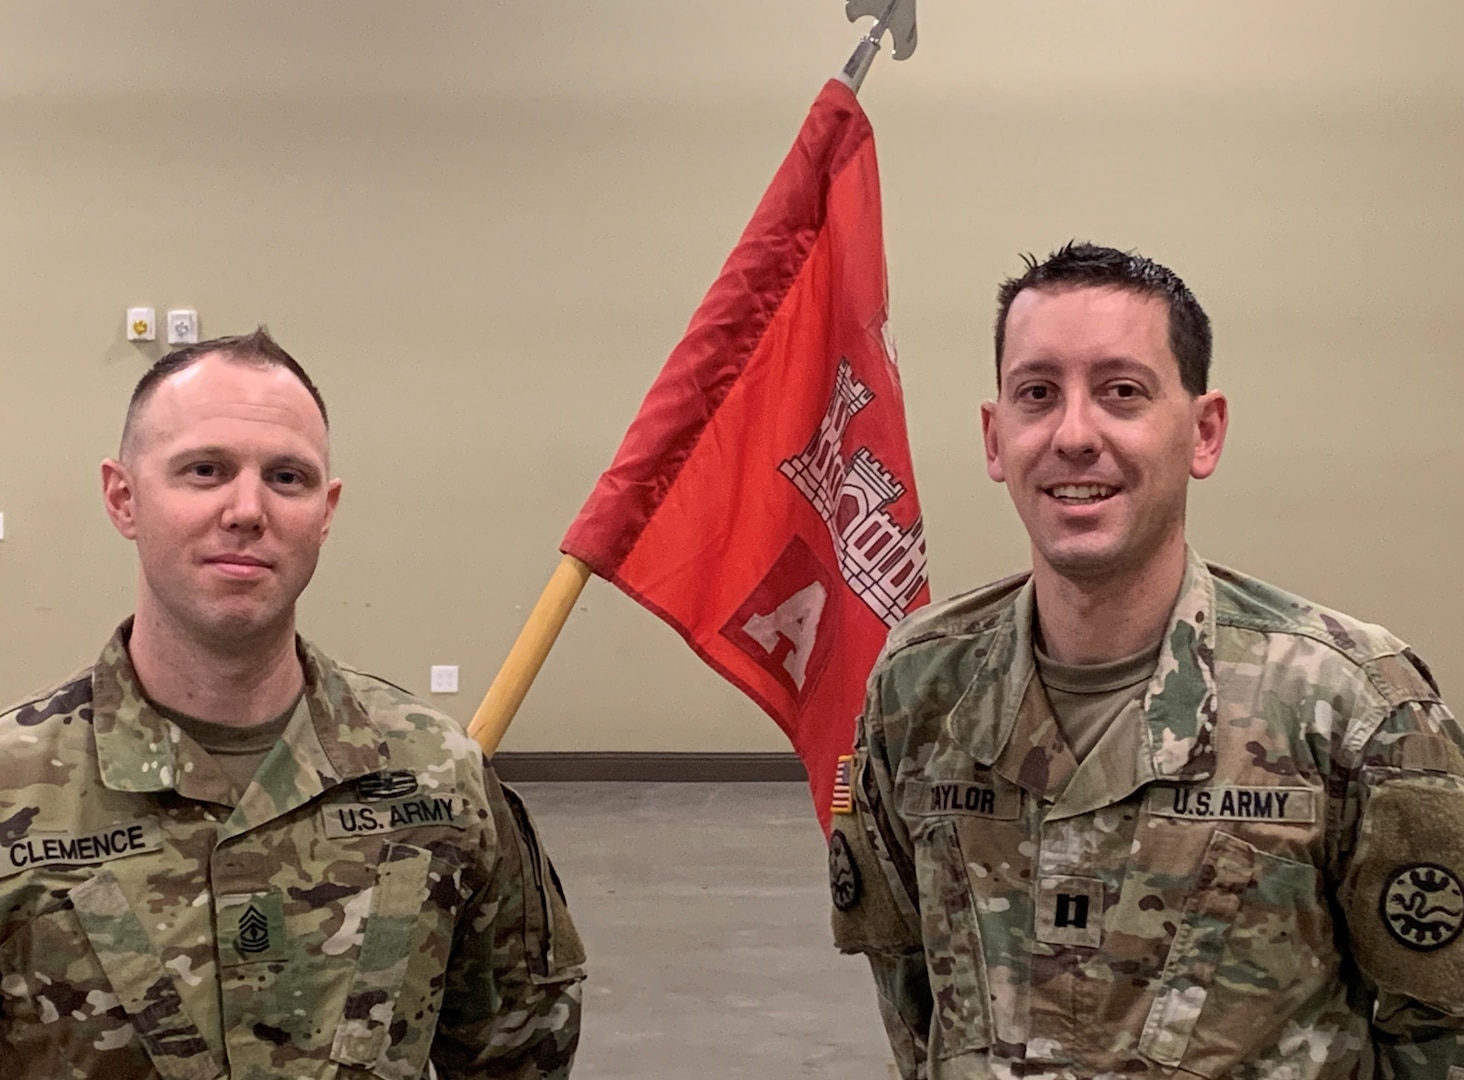 Idaho Army National Guard Capt. Robert Taylor and 1st Sgt. Derek Clemence serve in their childhood town of Mountain Home, Idaho, as commander and first sergeant of A Company, 116th Brigade Engineer Battalion. They grew up in the small town and are graduates of Mountain Home High School.